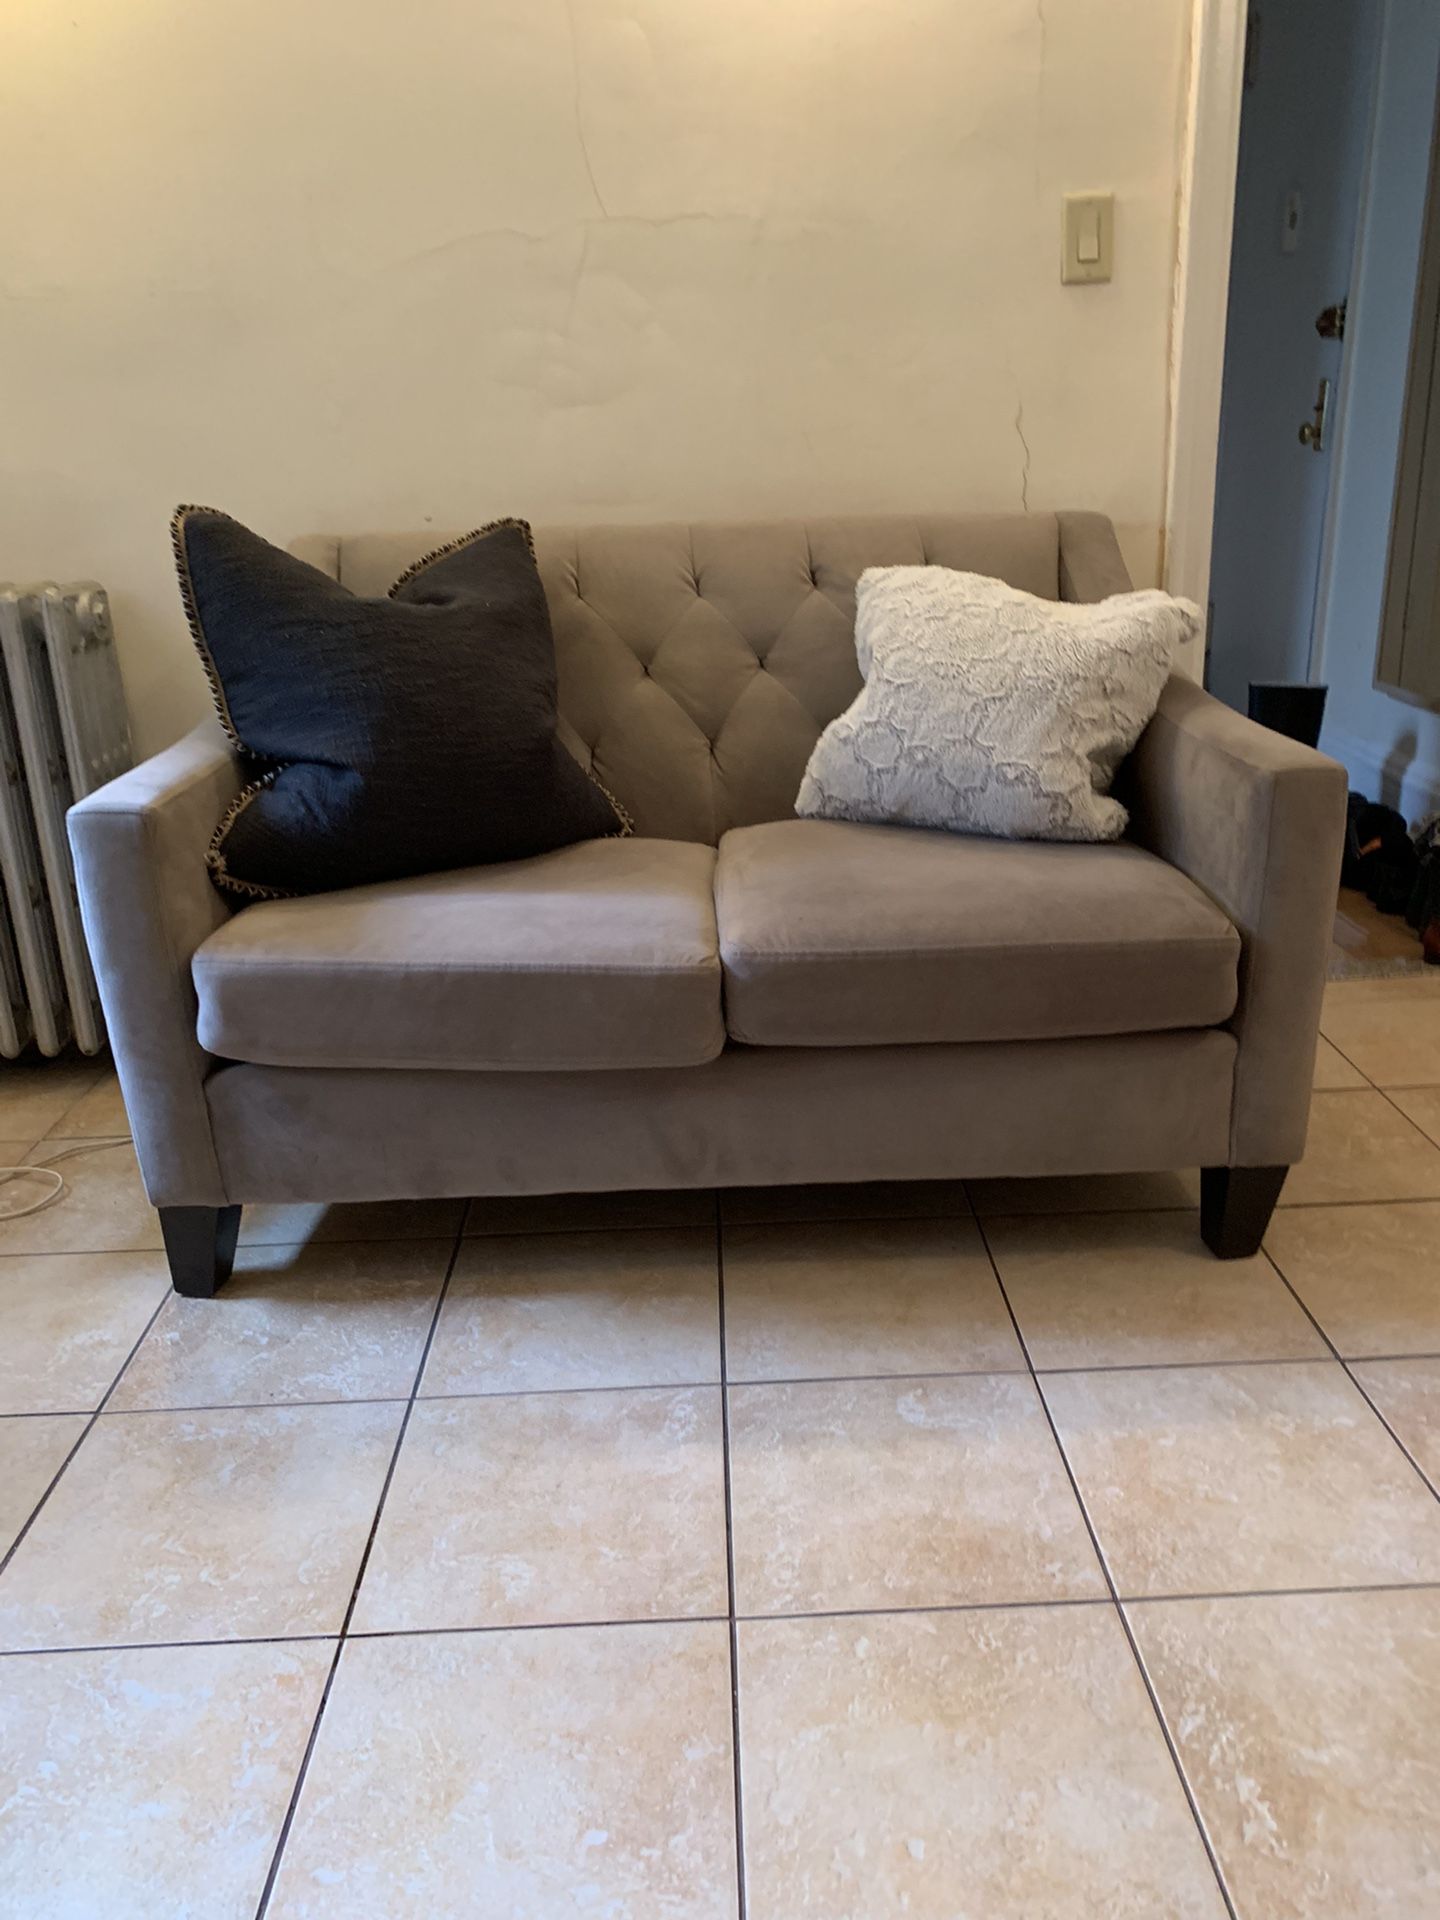 Love Seat For Sale 